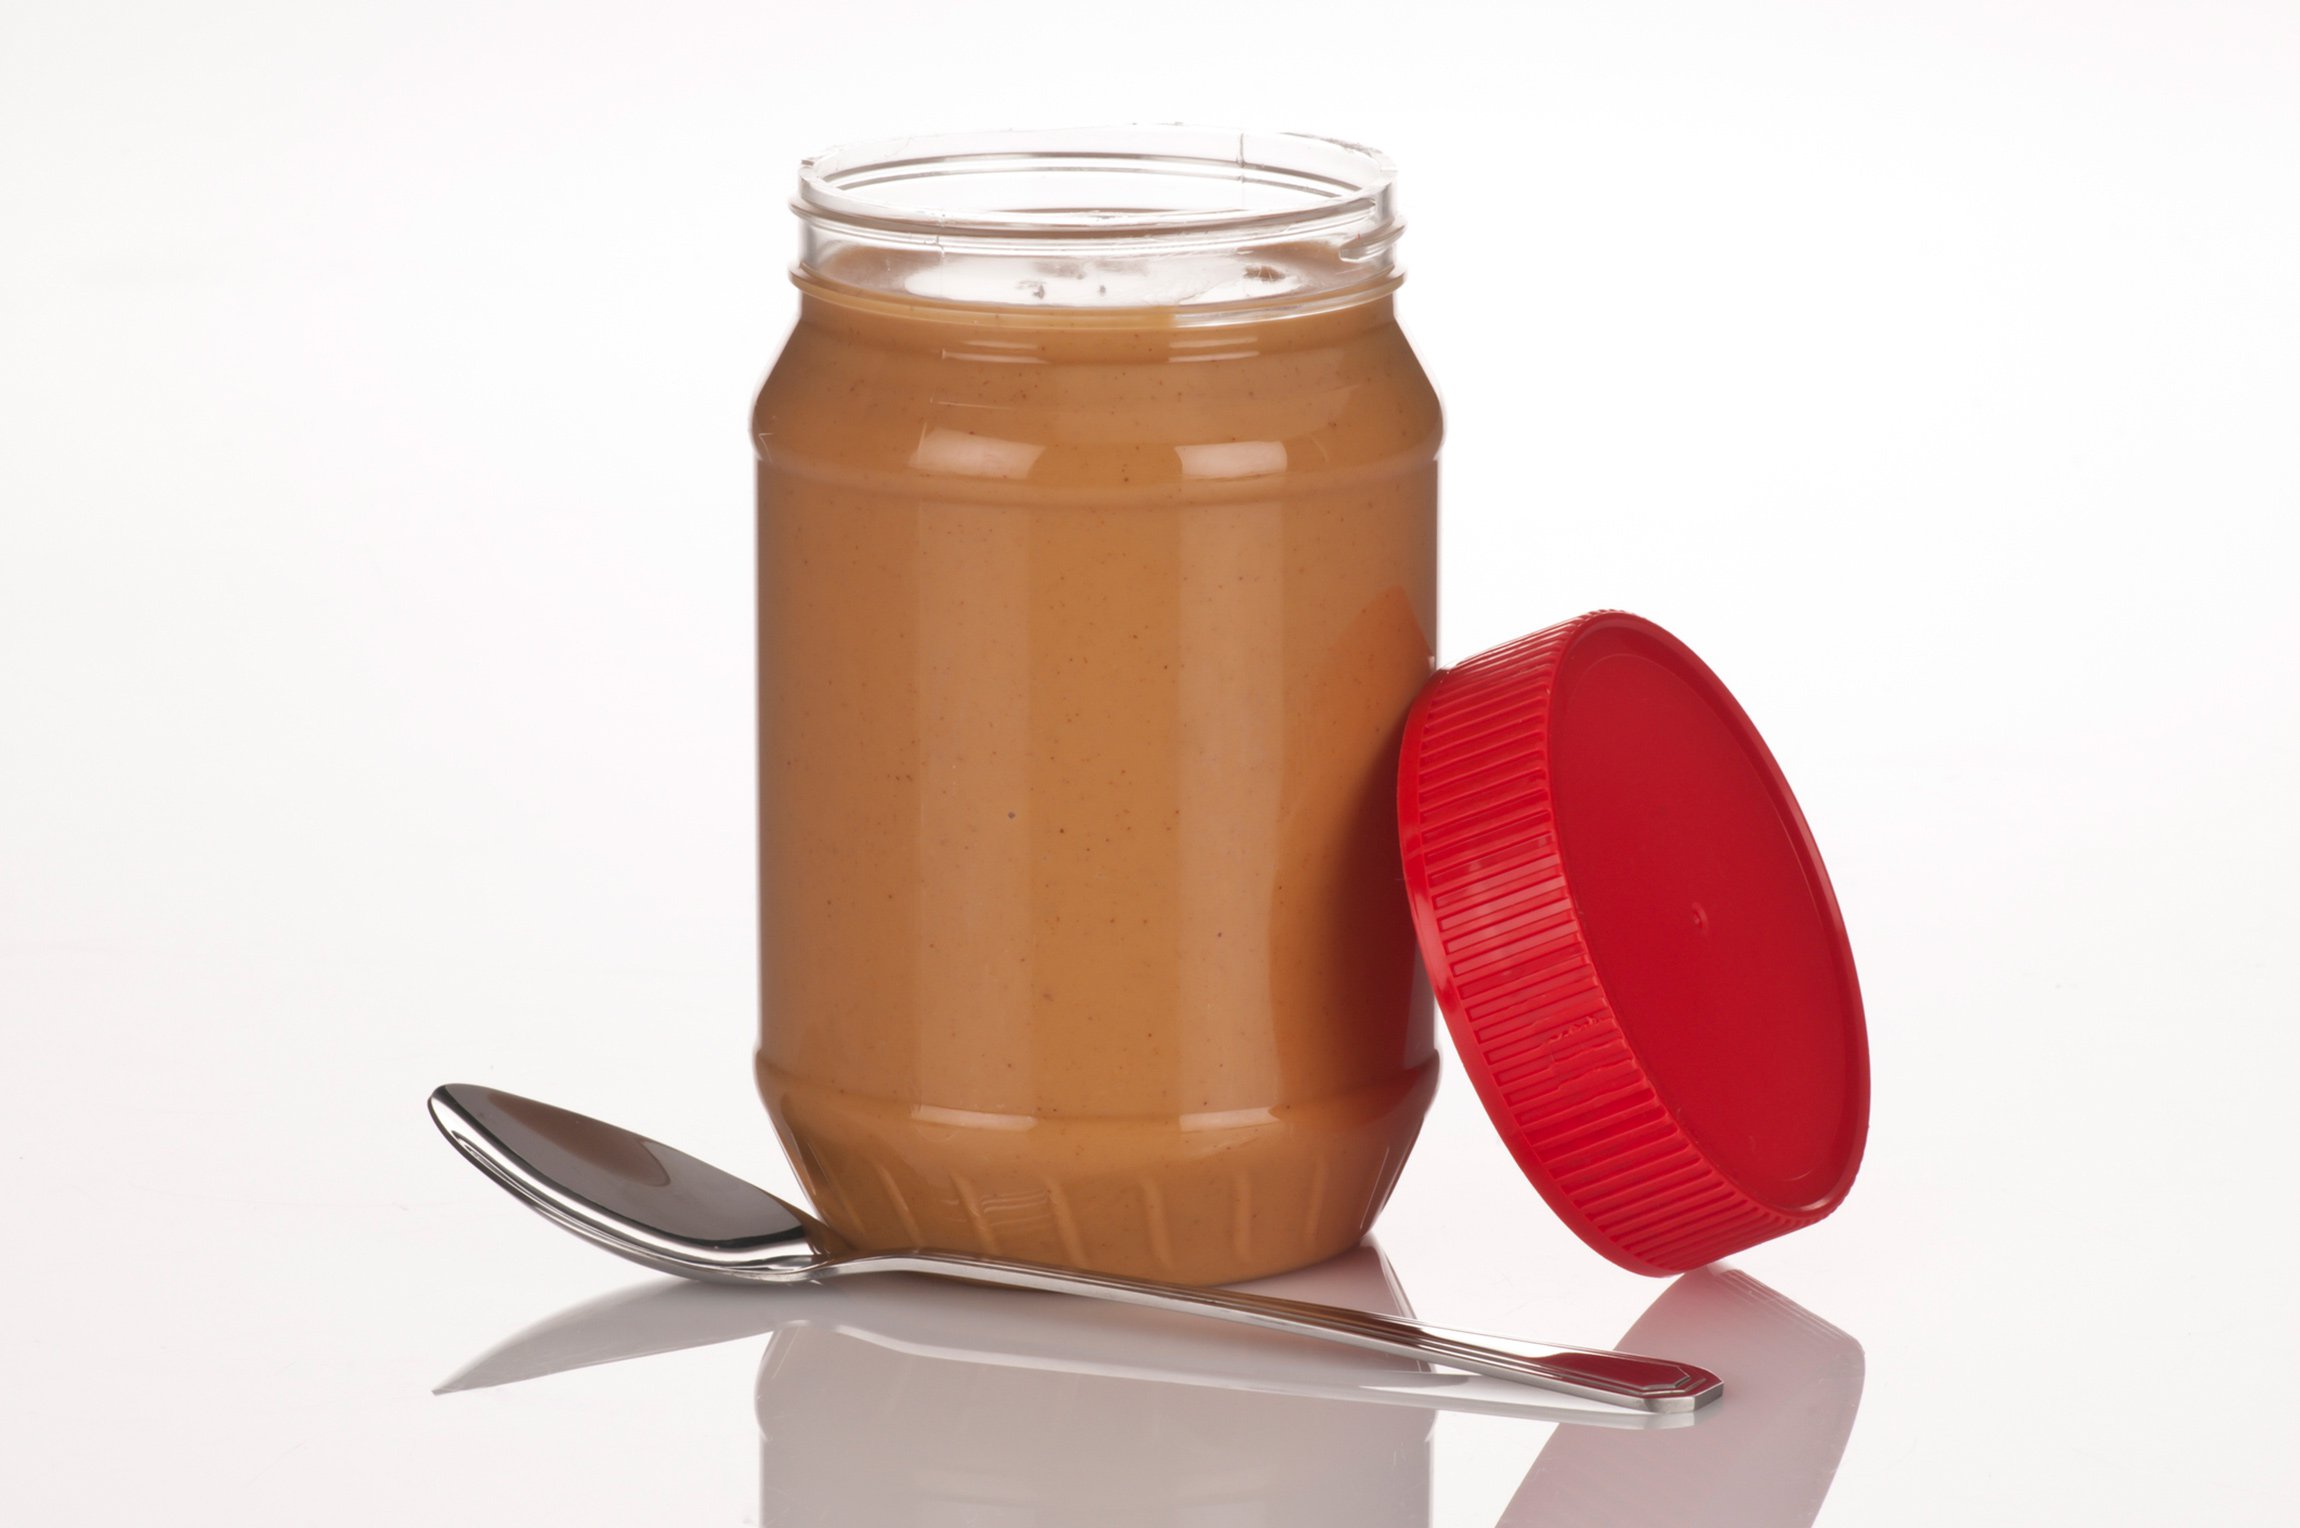 A jar of peanut butter with a spoon and the lid off